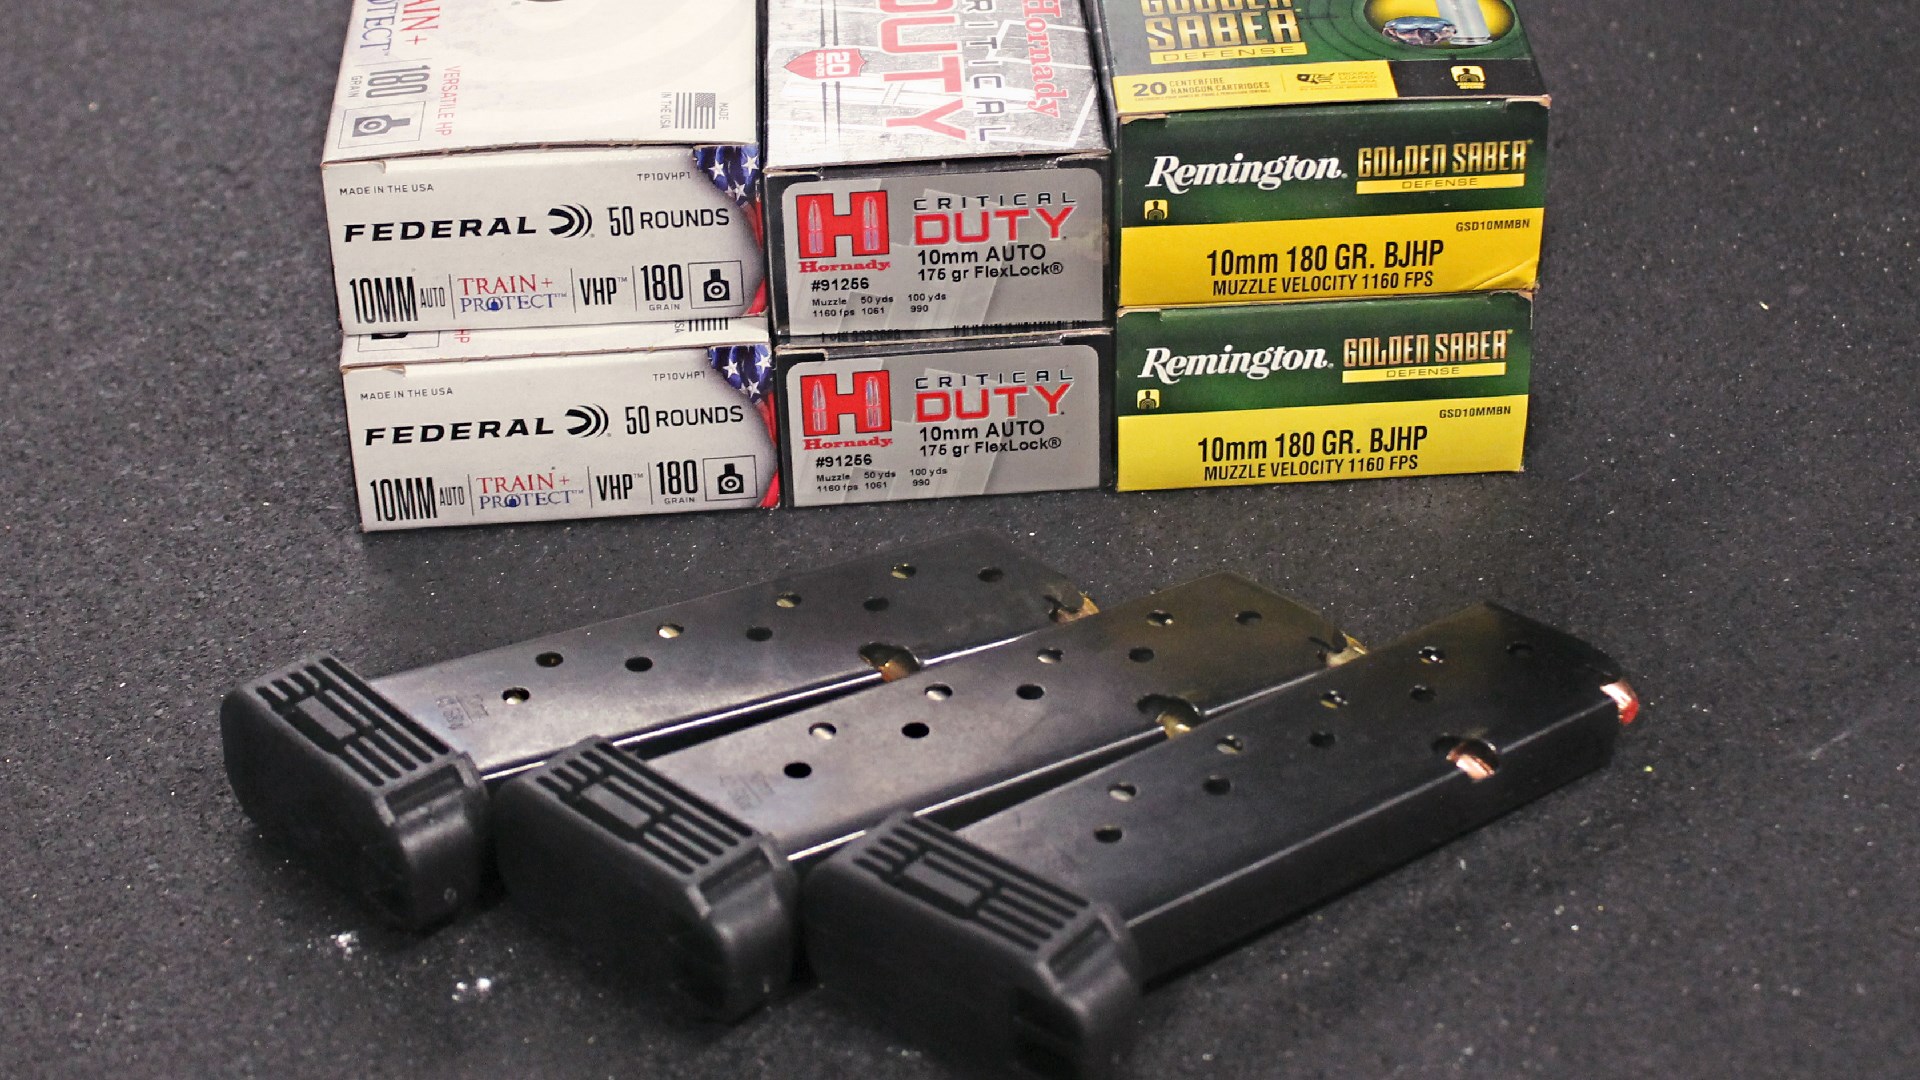 10 mm Auto ammunition boxes three types federal hornady remington shown with three pistol magazines for hi-point jxp 10